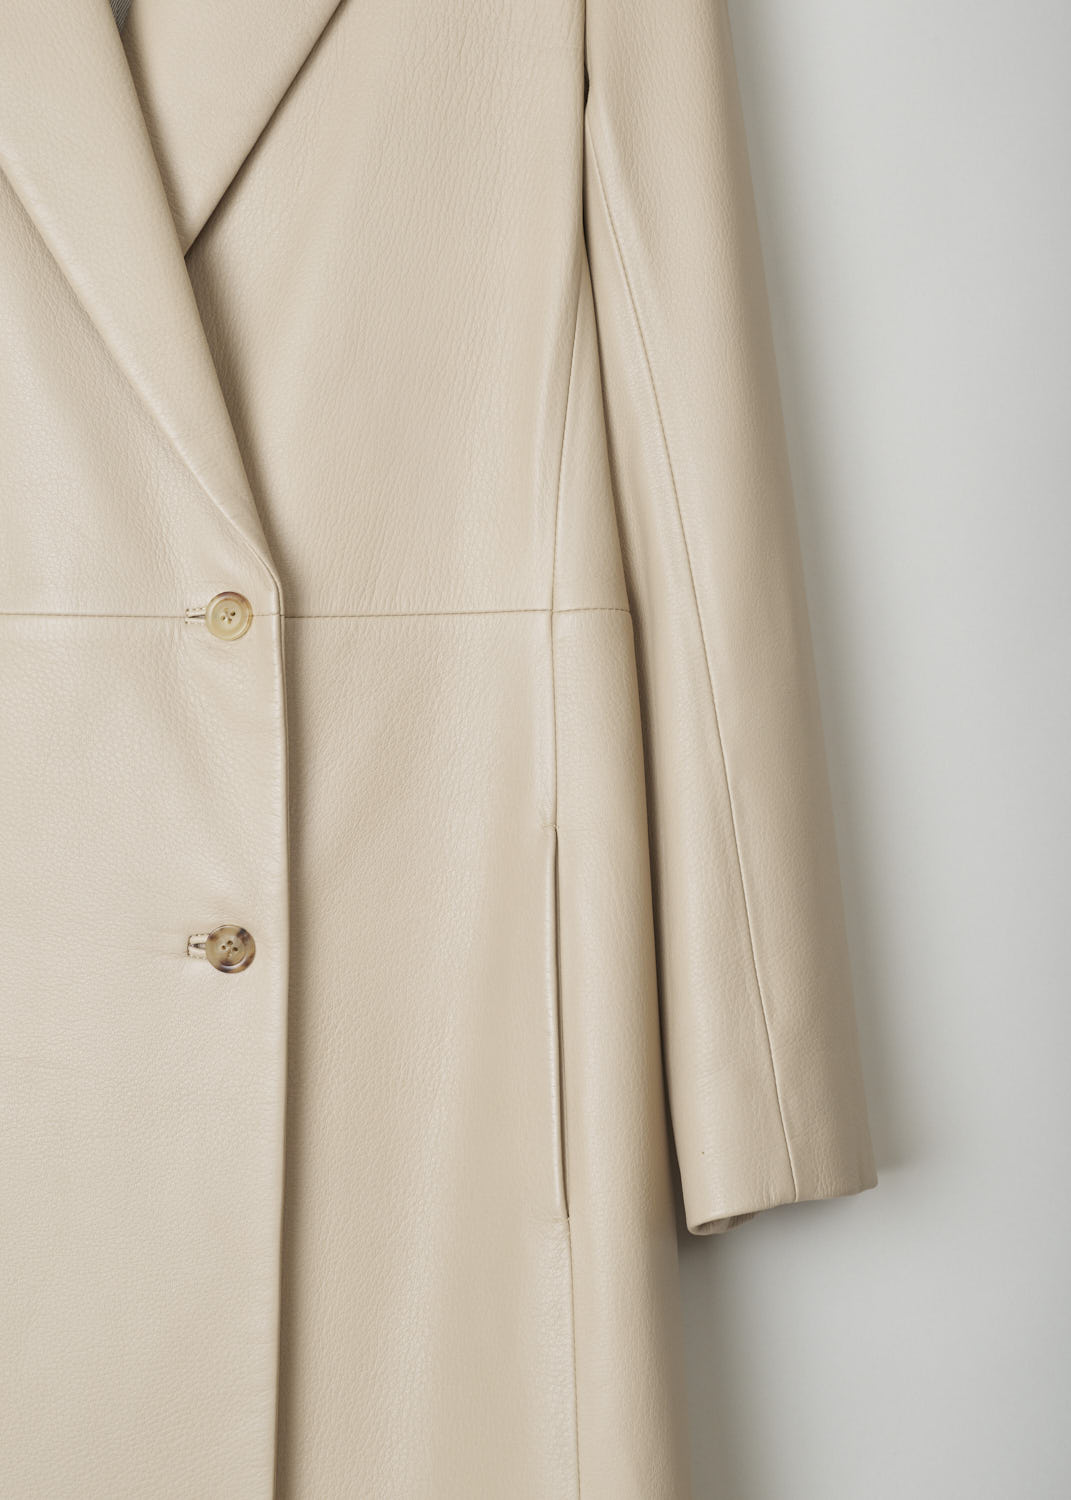 THE ROW, BEIGE LEATHER COAT, GERRICK_I_6I_8L79_SOAPSTONE, Beige, Detail, This beautiful double breasted coat has peaked lapels. A decorative, horizontal seam can be found across the front. The coat has two concealed slanted pockets on either side. 
